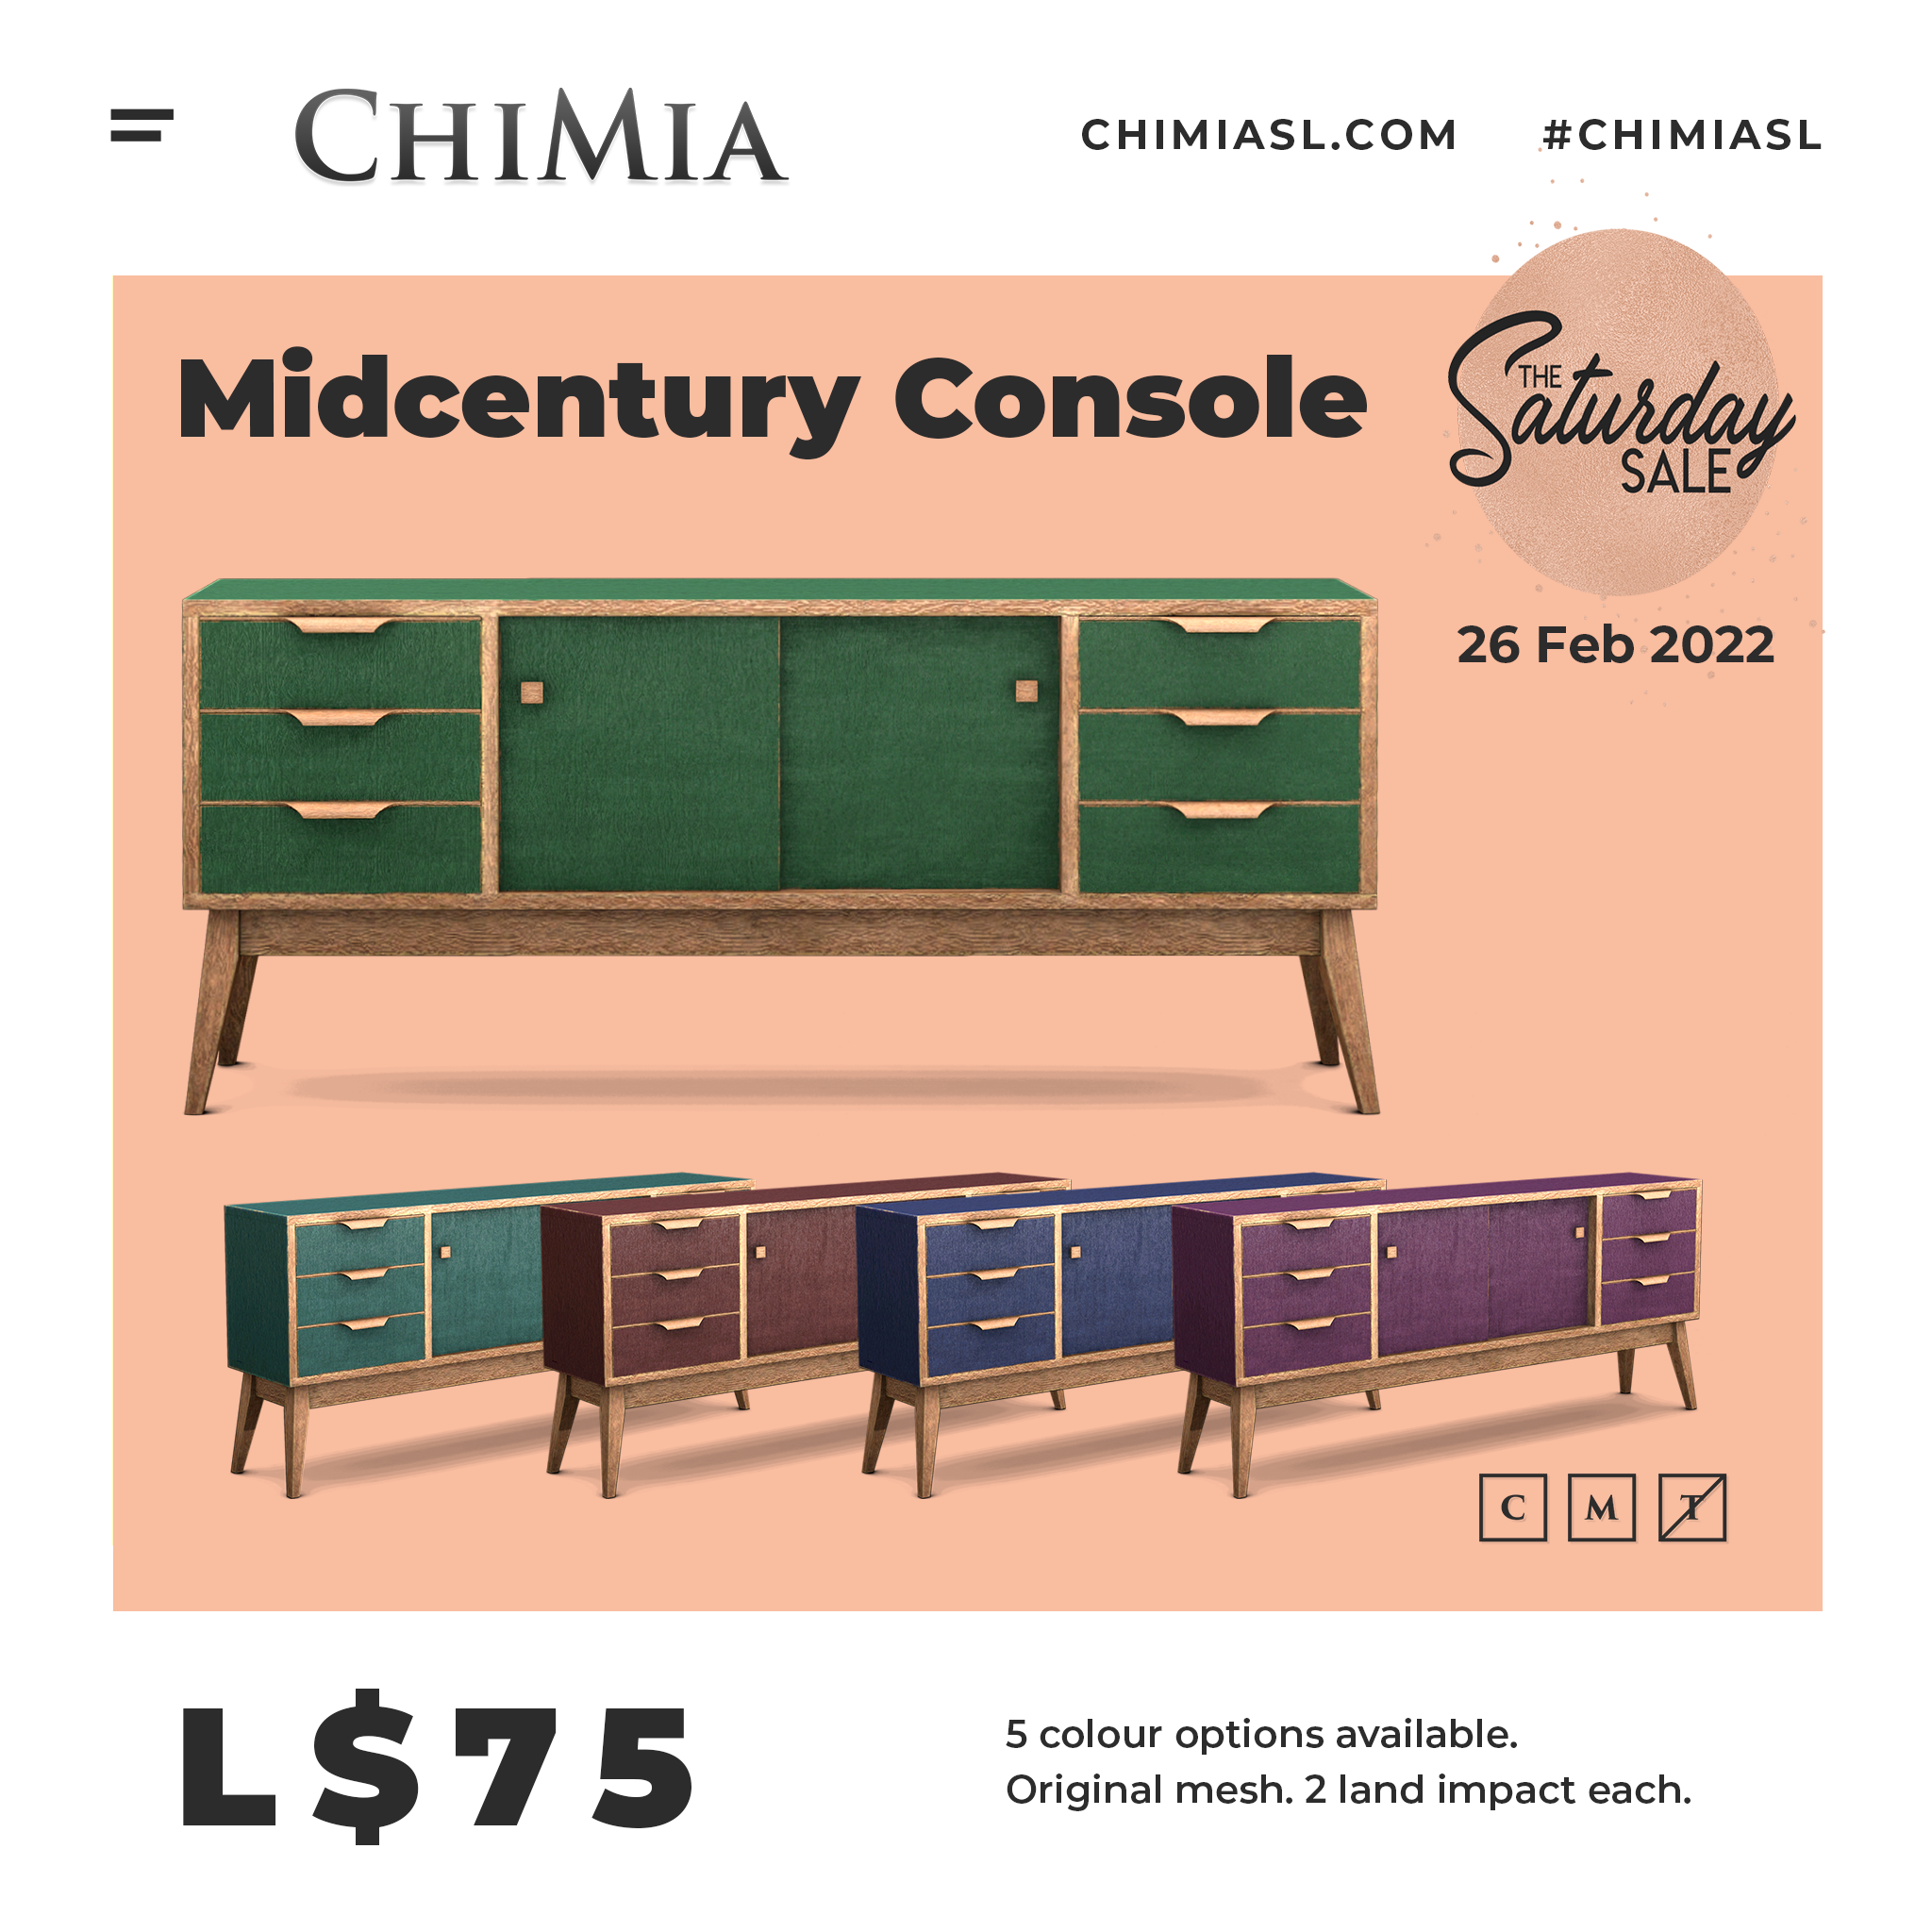 Midcentury Console on sale for TSS 26 Feb ’21